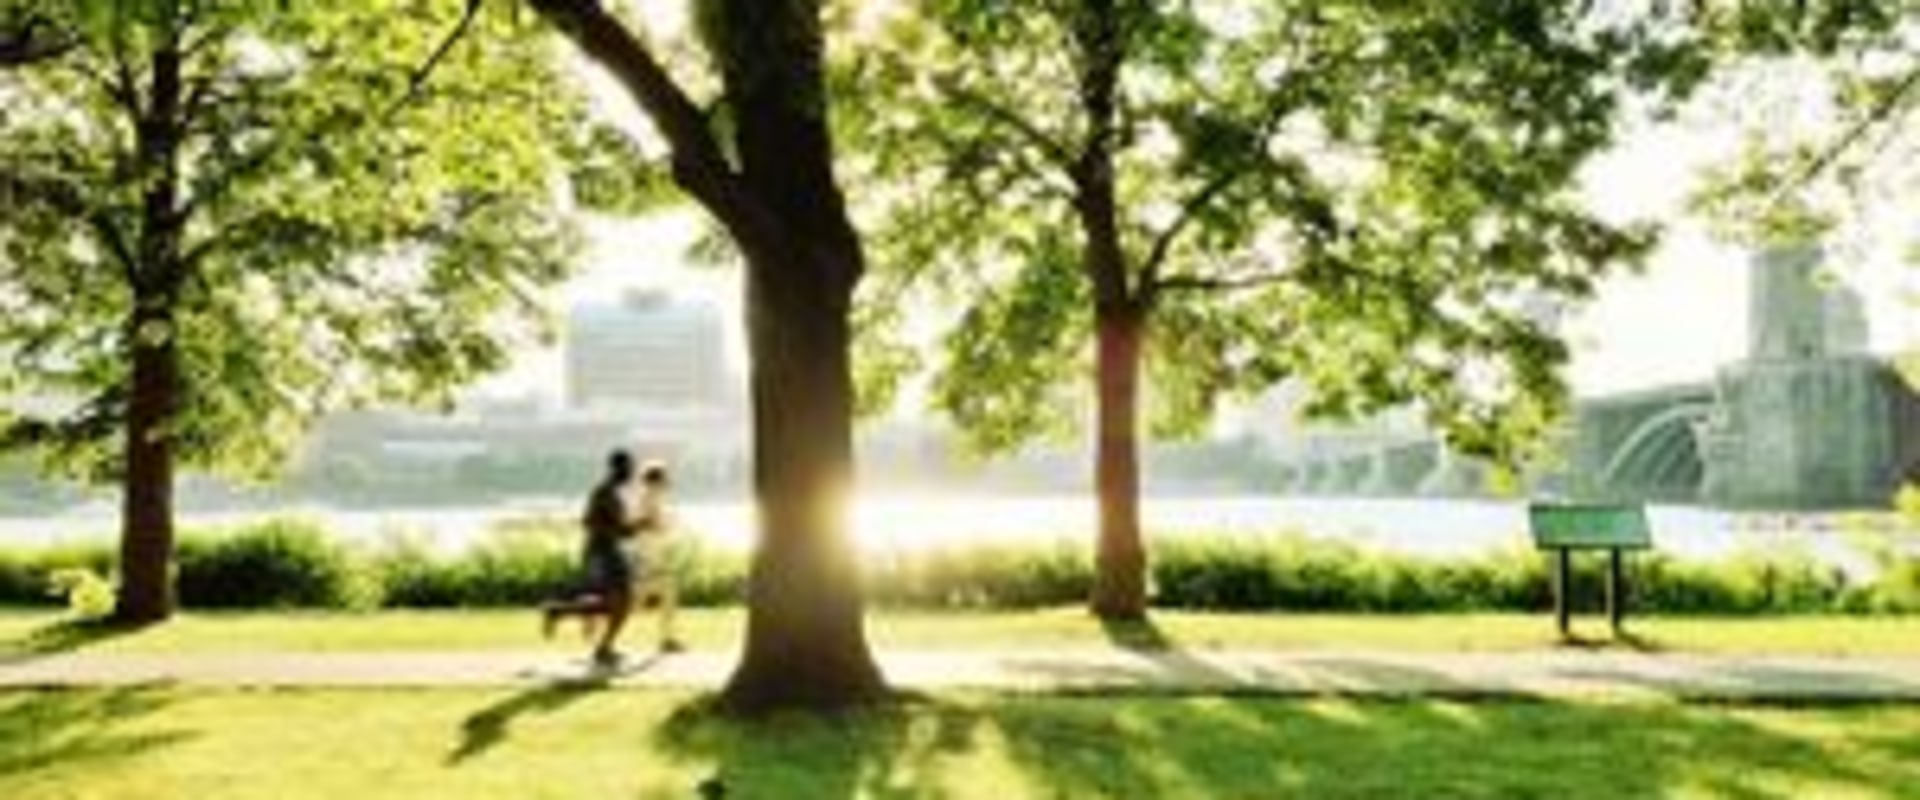 What makes a healthy urban forest?